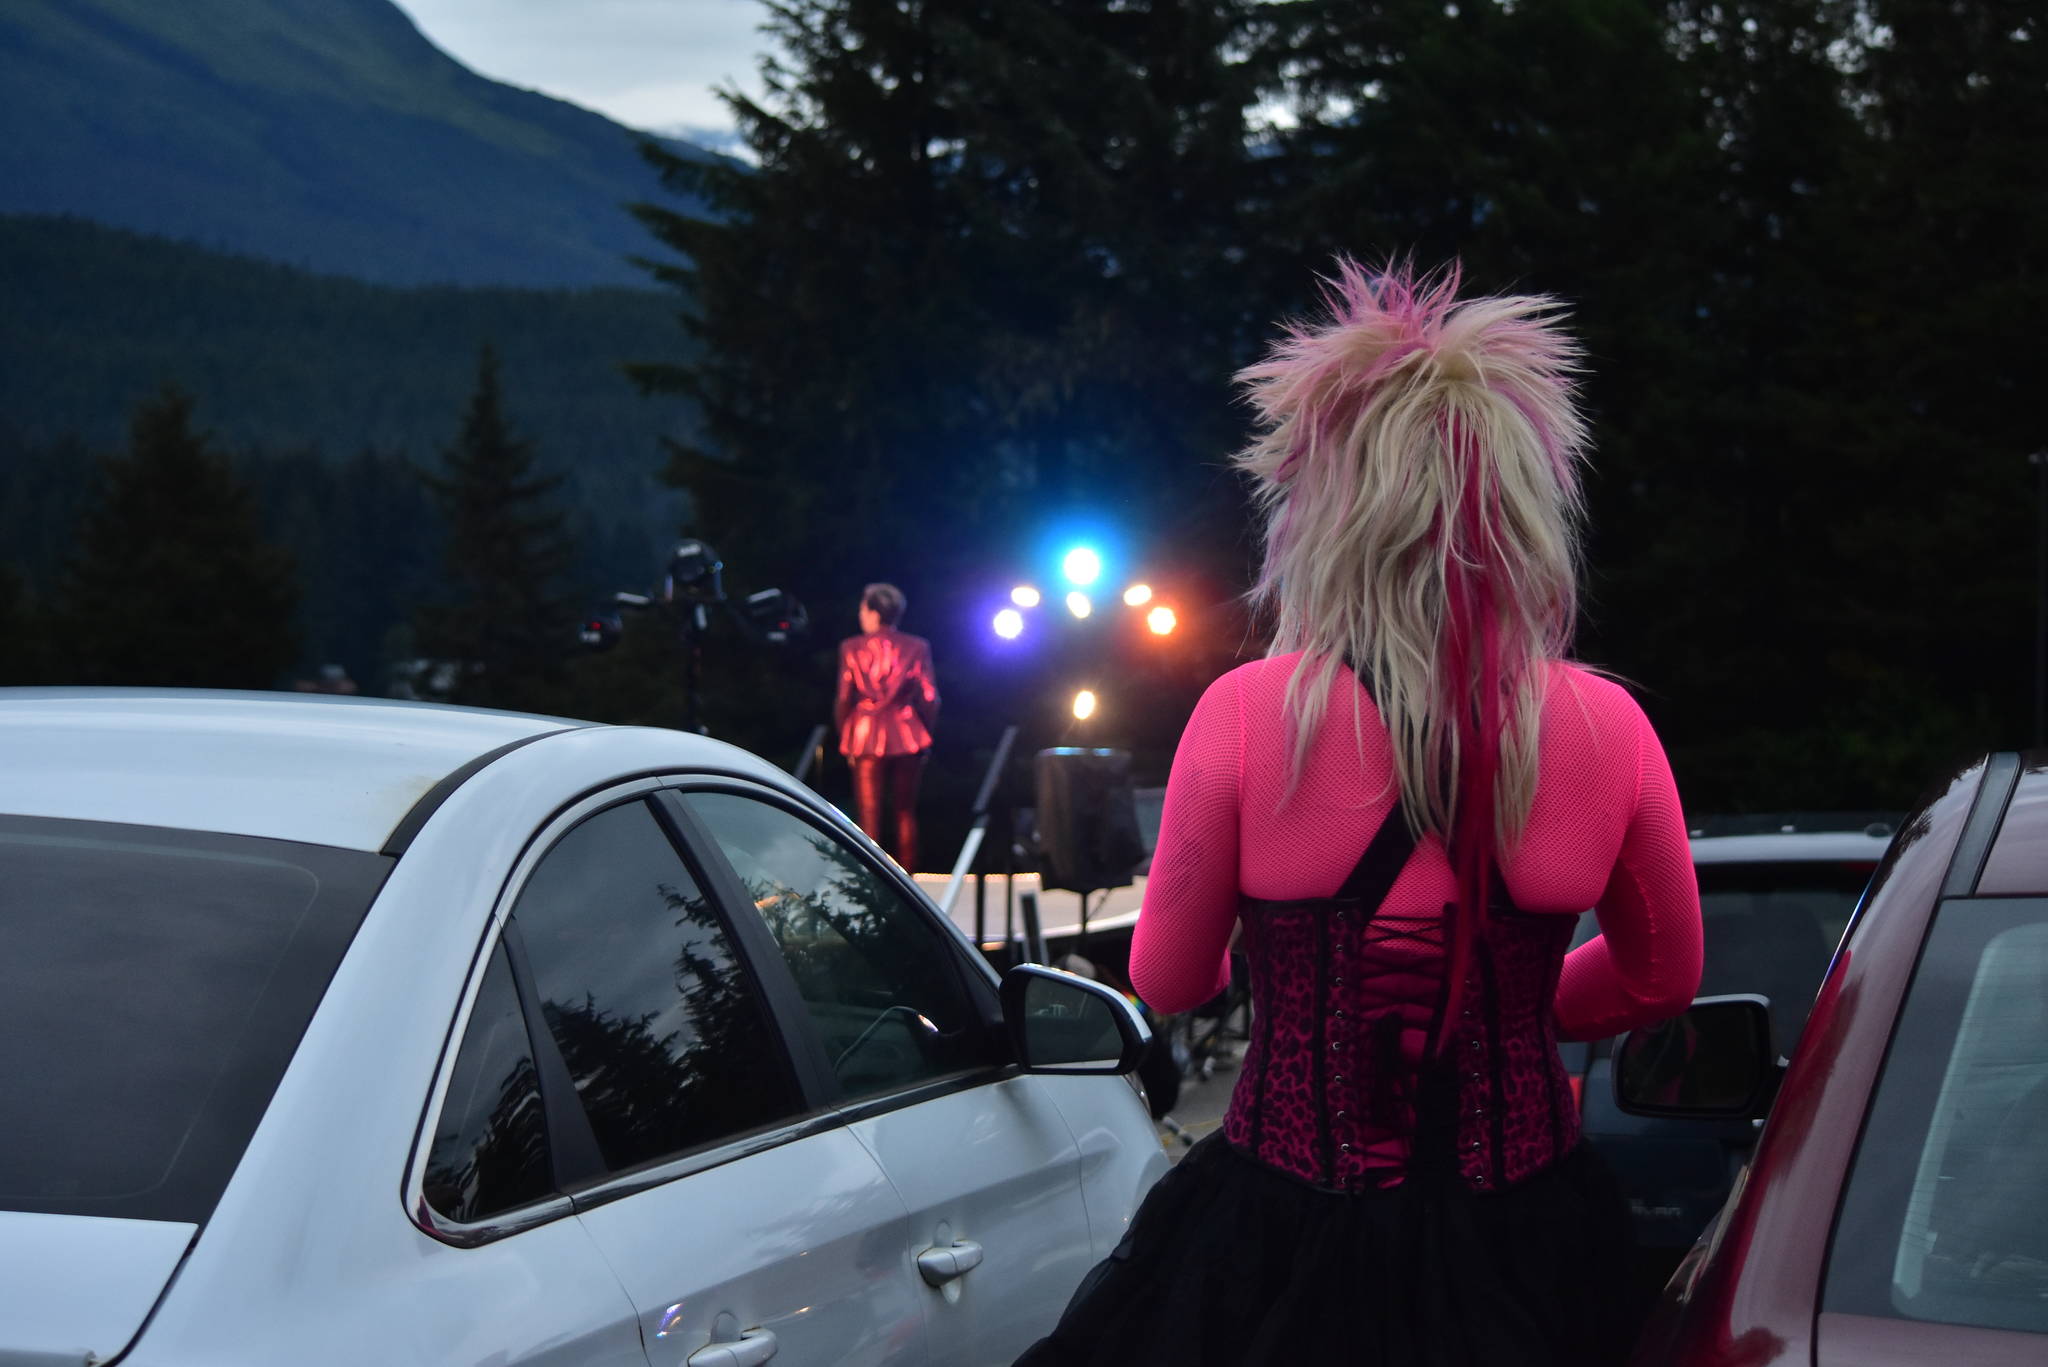 Photos: See the GLITZ and glamor of this year’s drive-in drag show